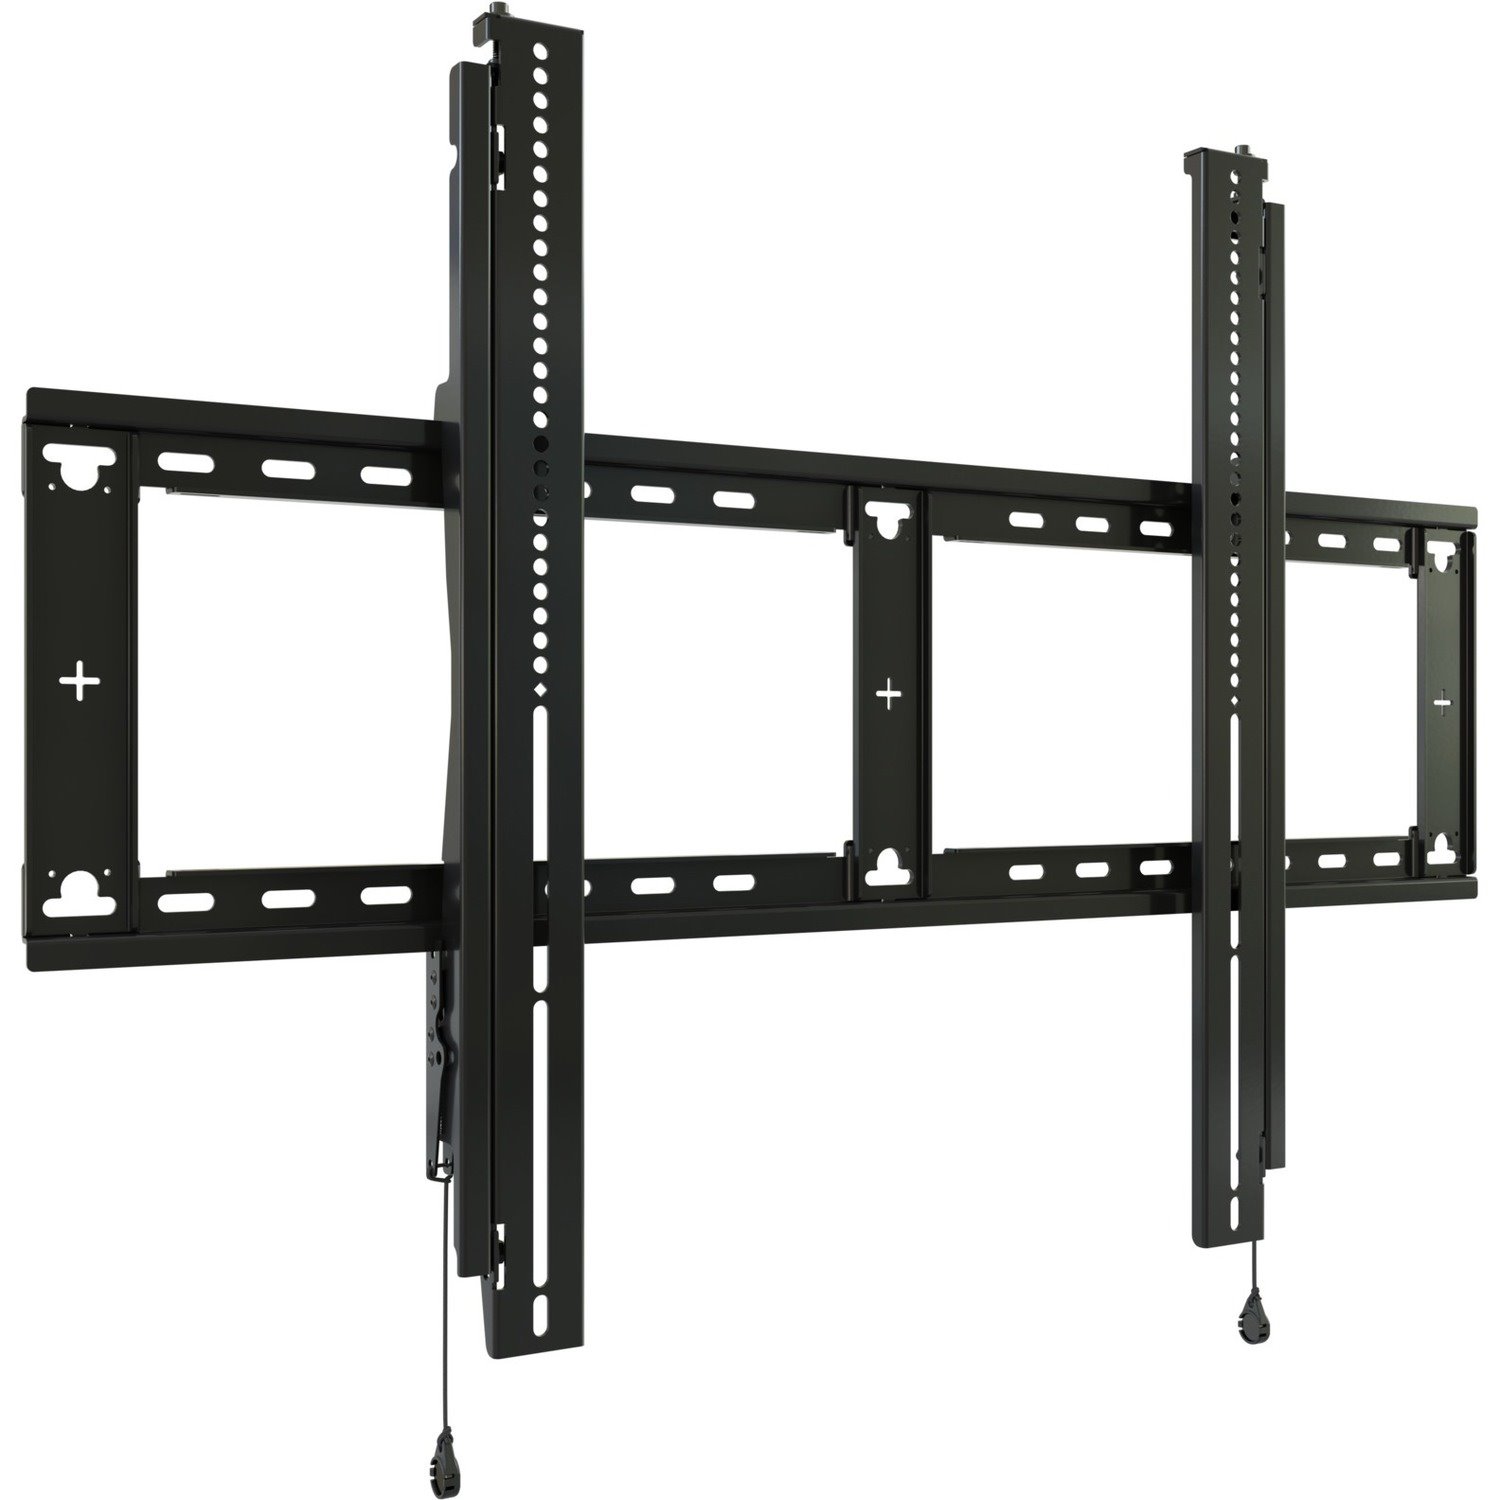 Chief Fit Extra-Large Display Wall Mount - Fixed - For Displays 49-98"